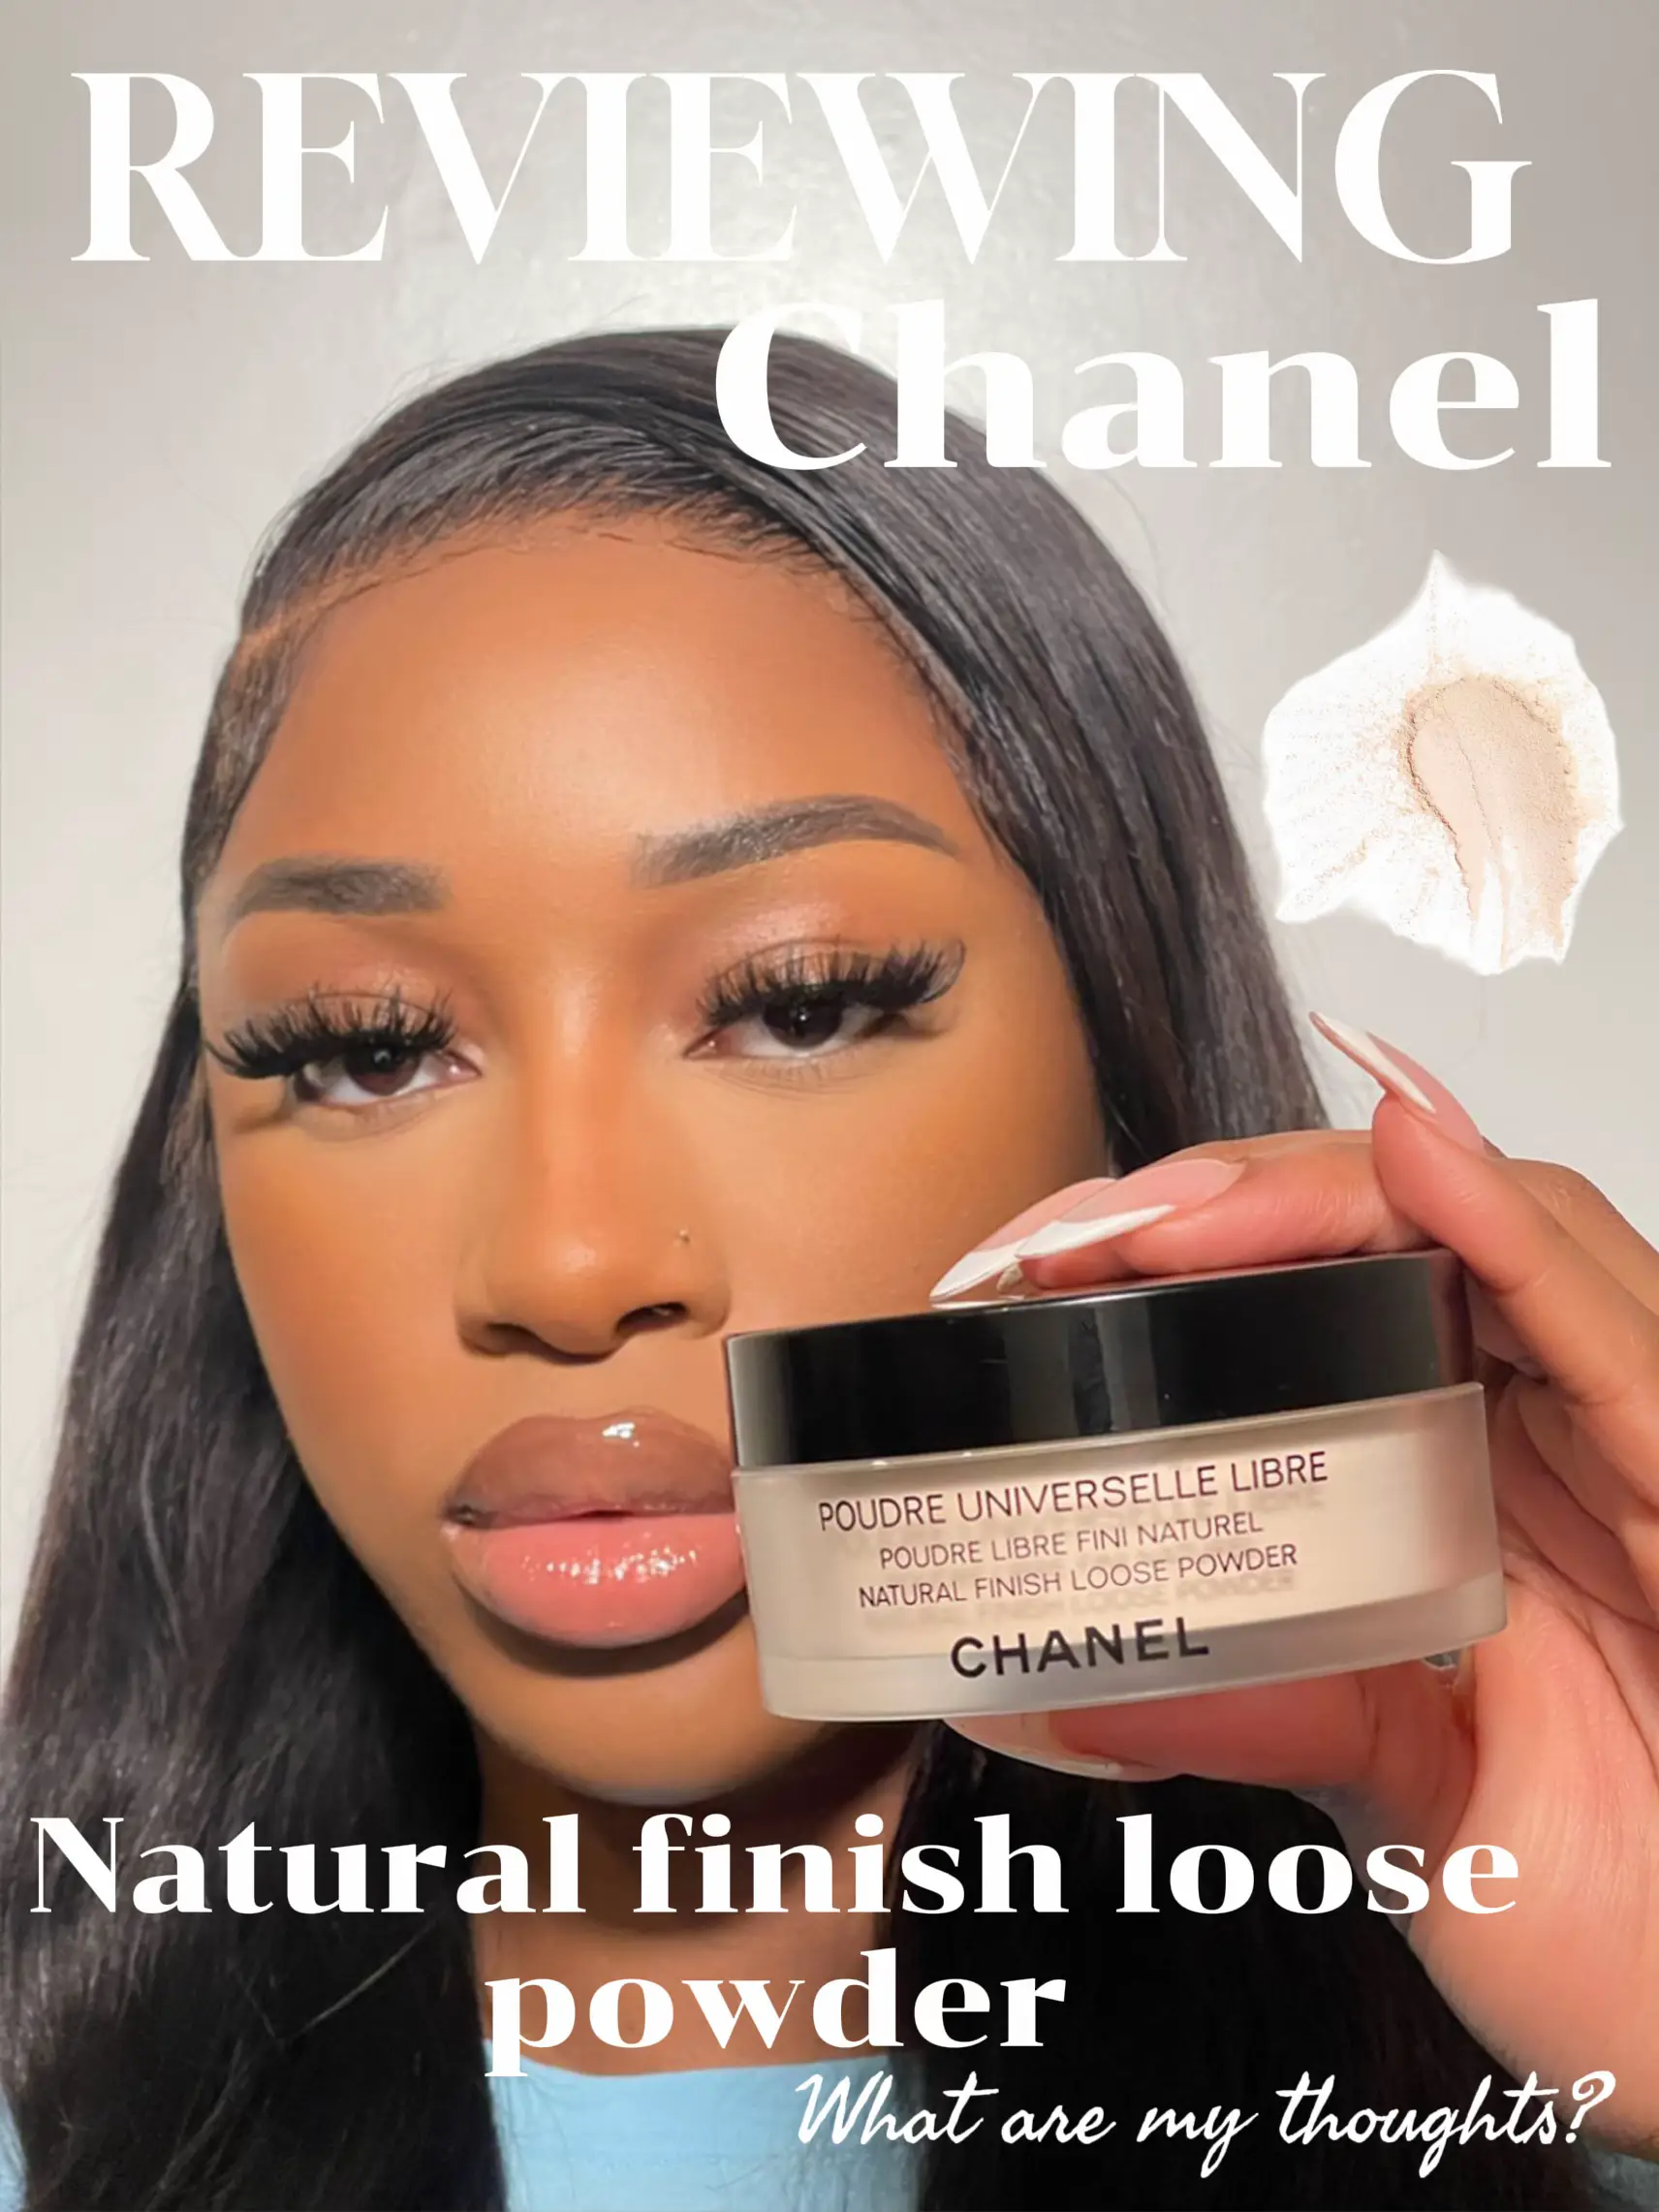 Chanel Loose Powder. Hit or miss?, Gallery posted by Praise Law